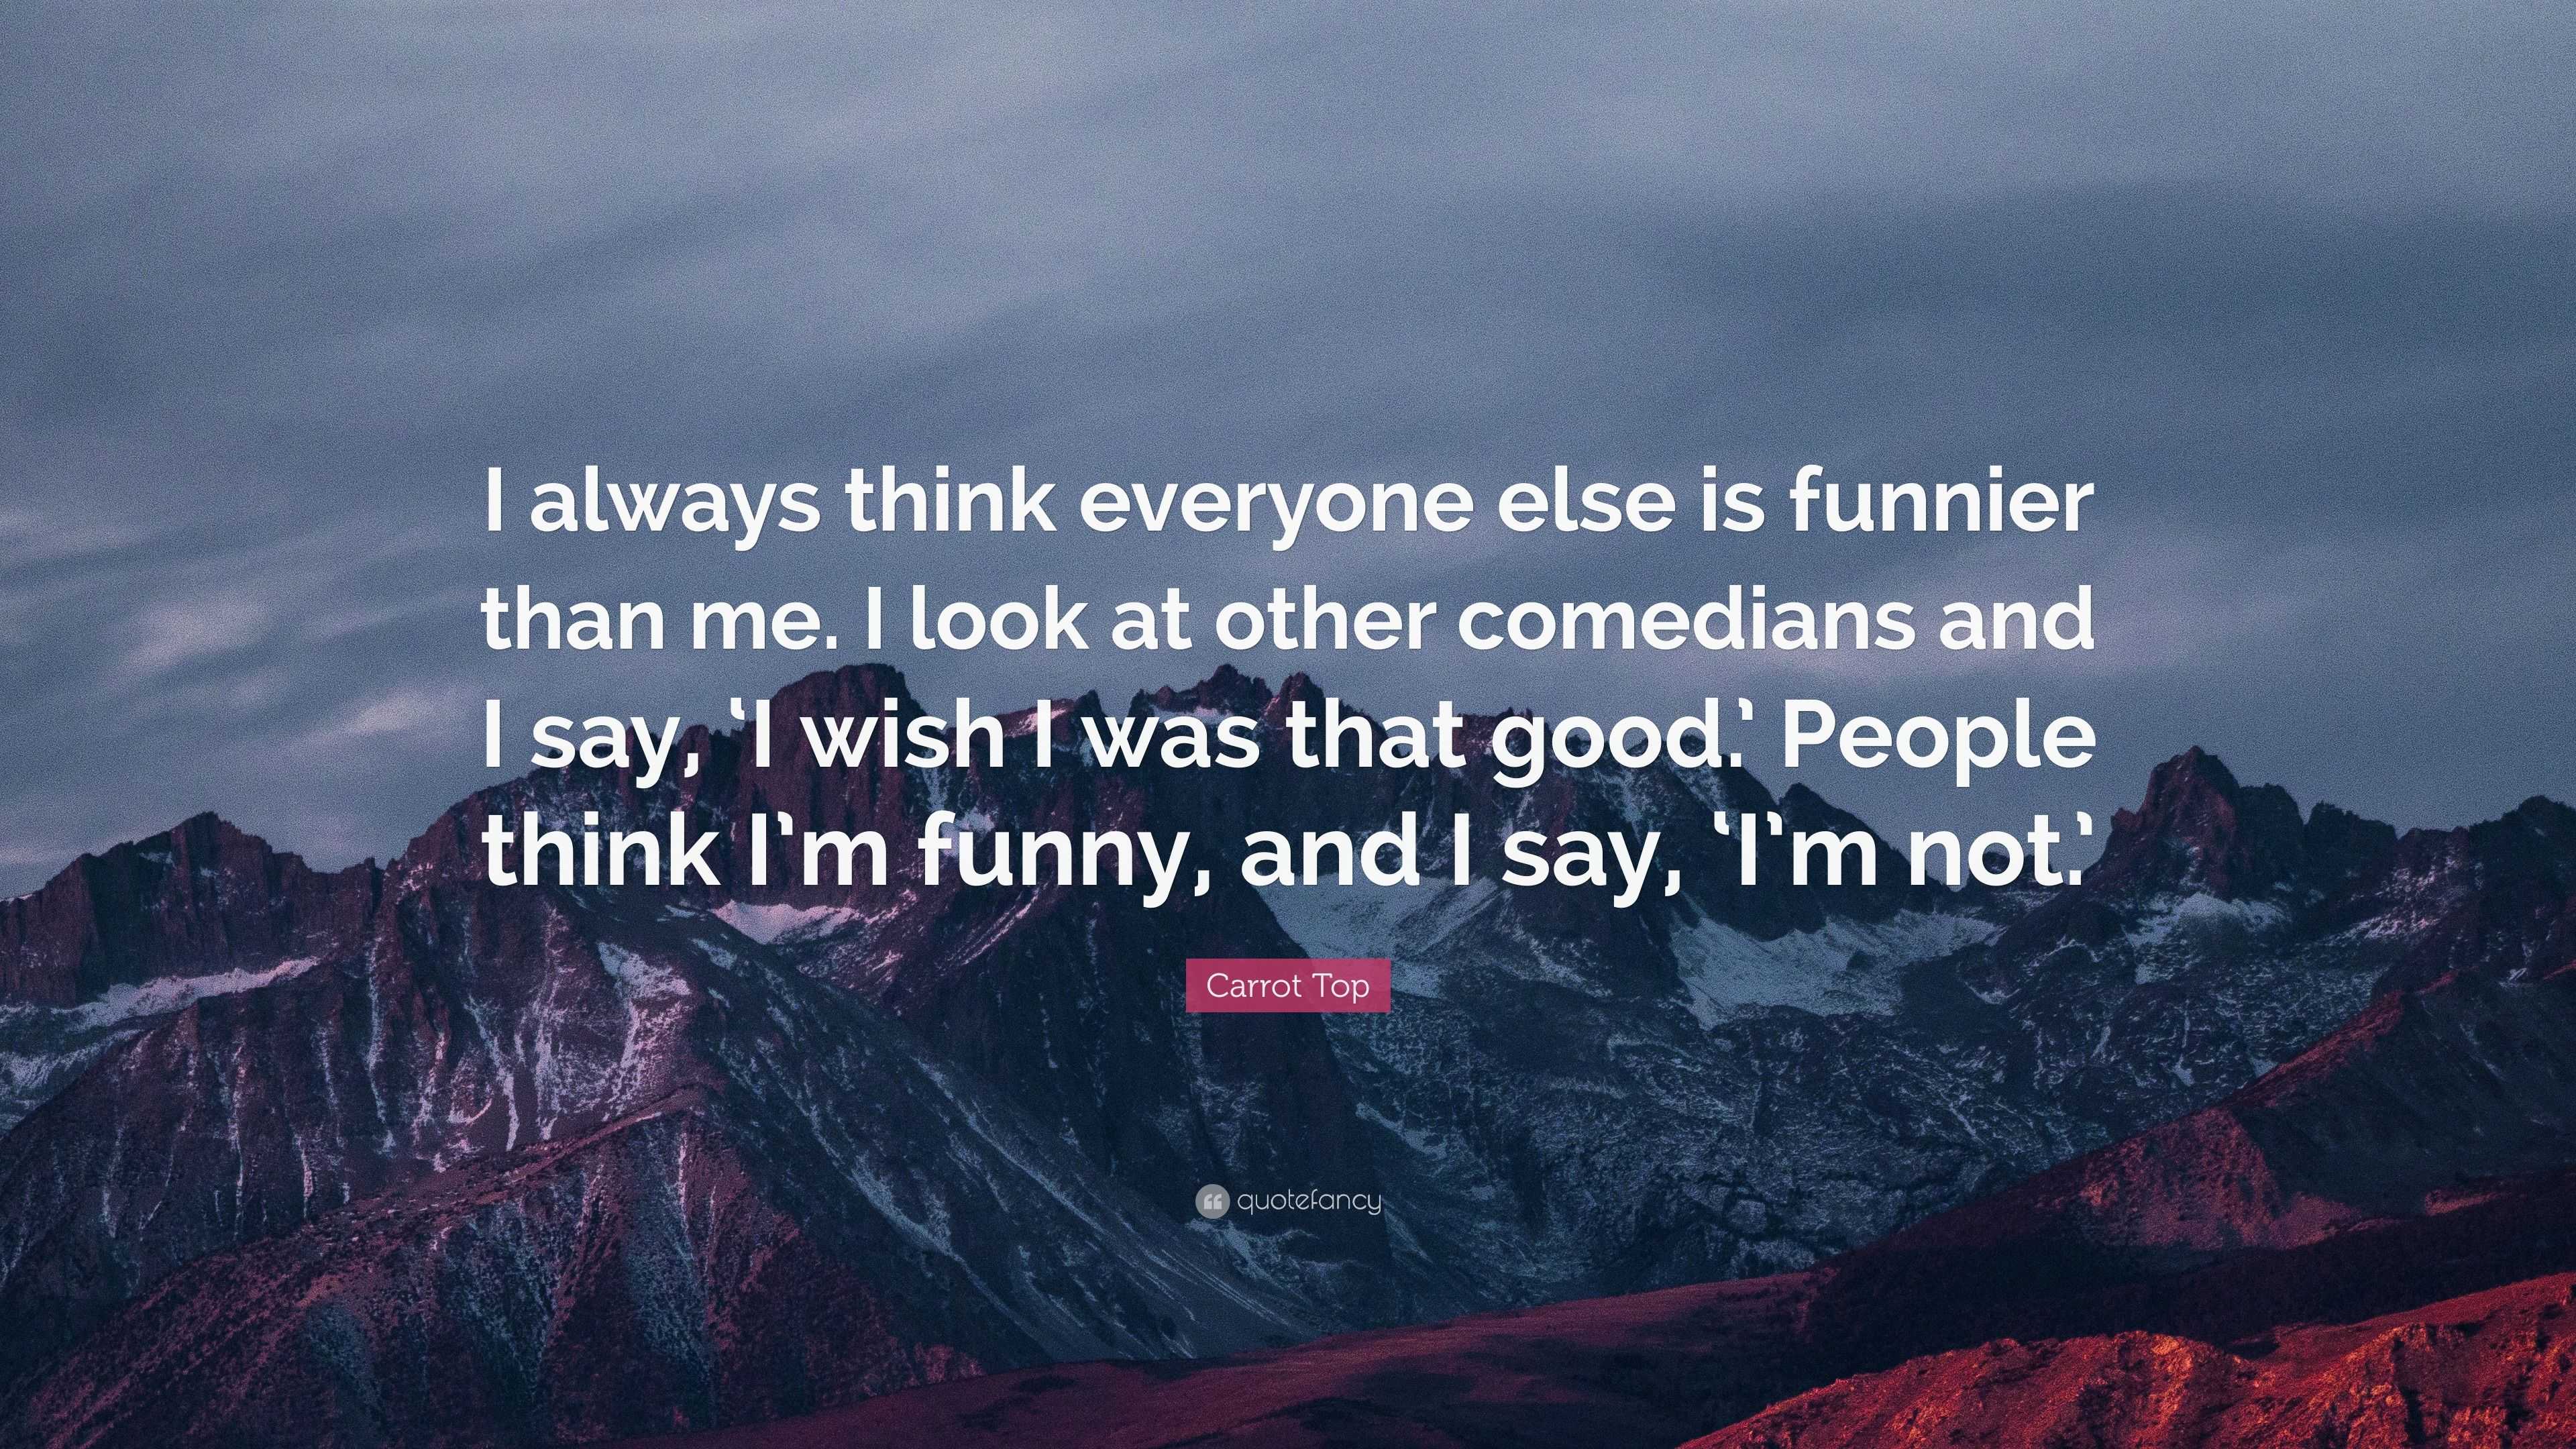 Carrot Top Quote: “I always think everyone else is funnier than me. I ...